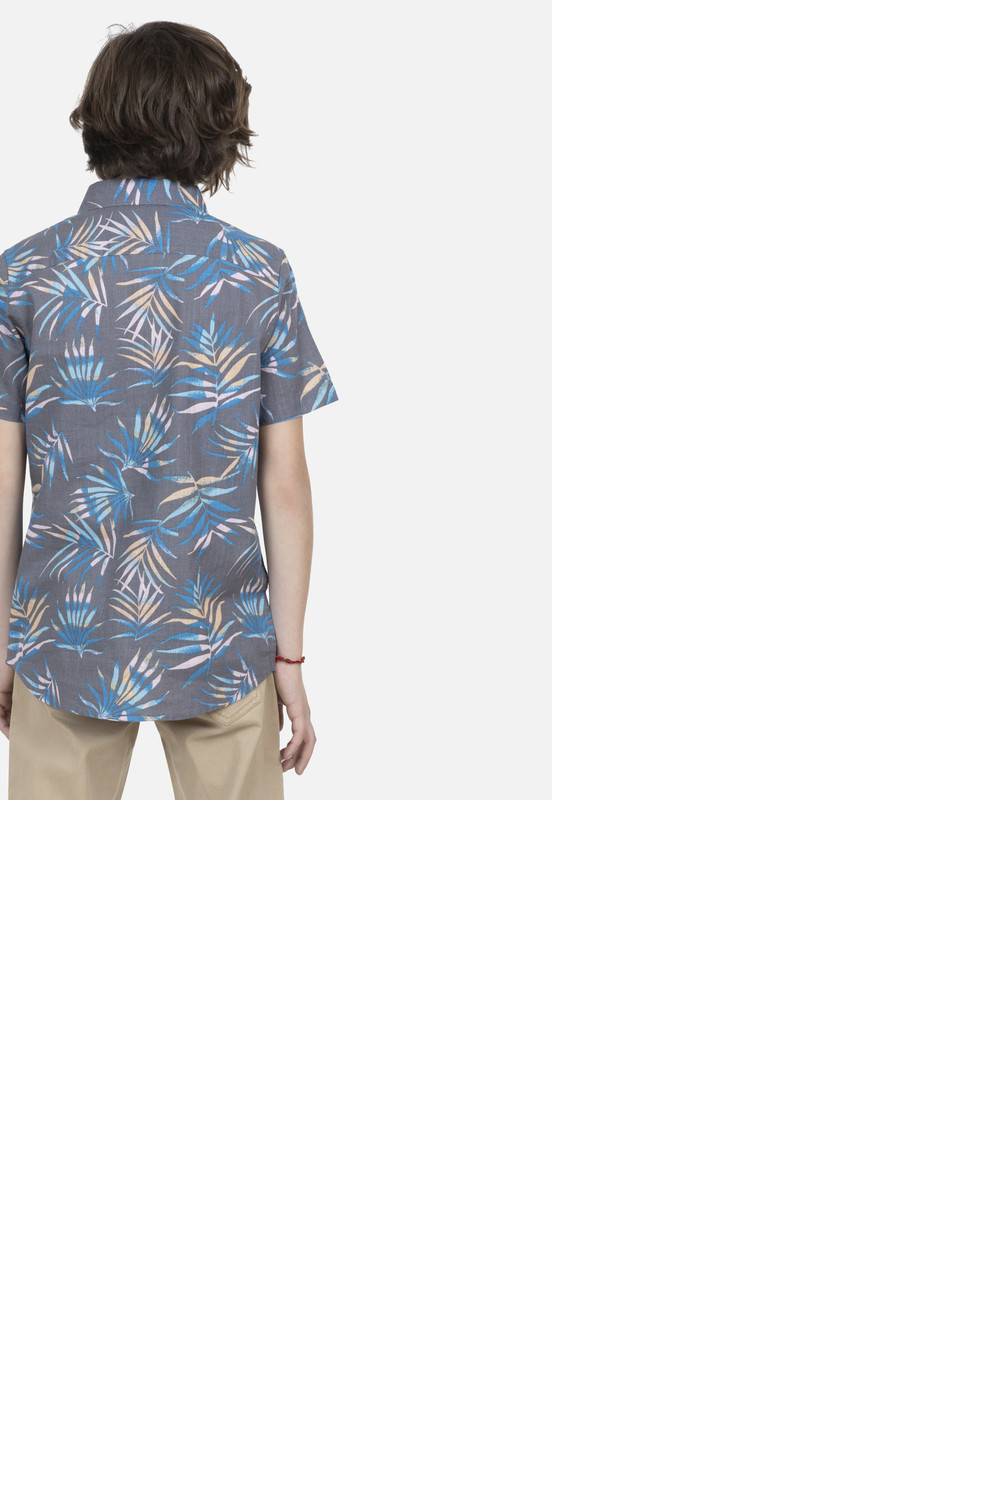 MAUI AND SONS - Camisa M/C 5C932 Gris